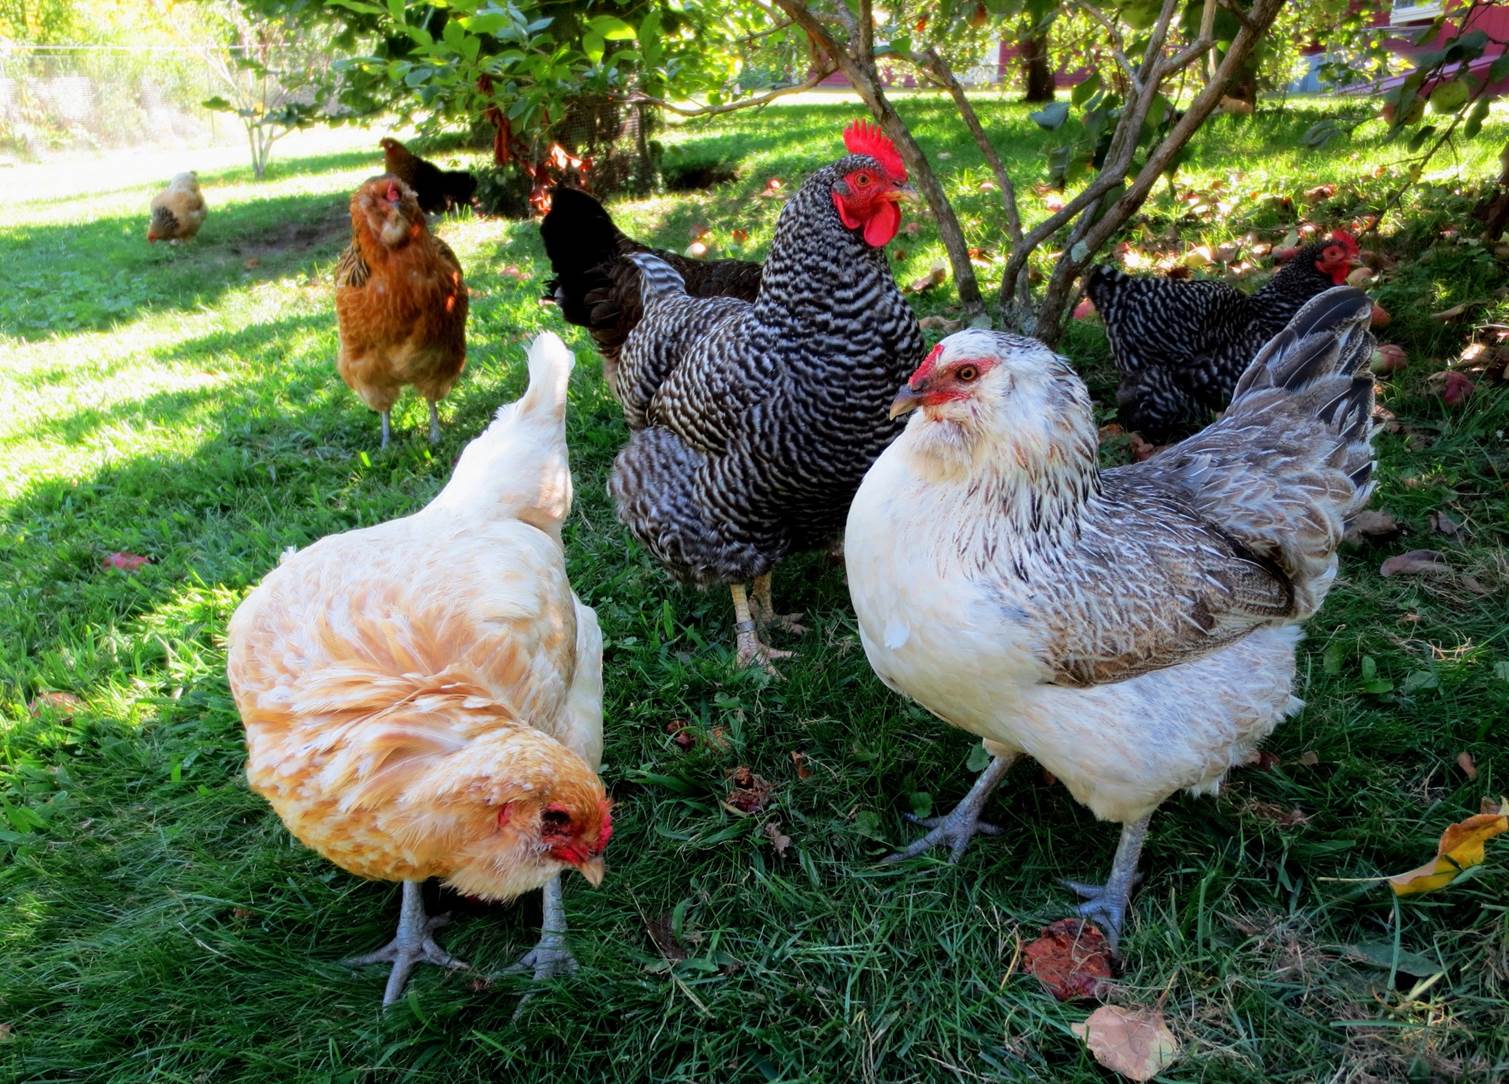 Image of several chickens feeding on a lawn.